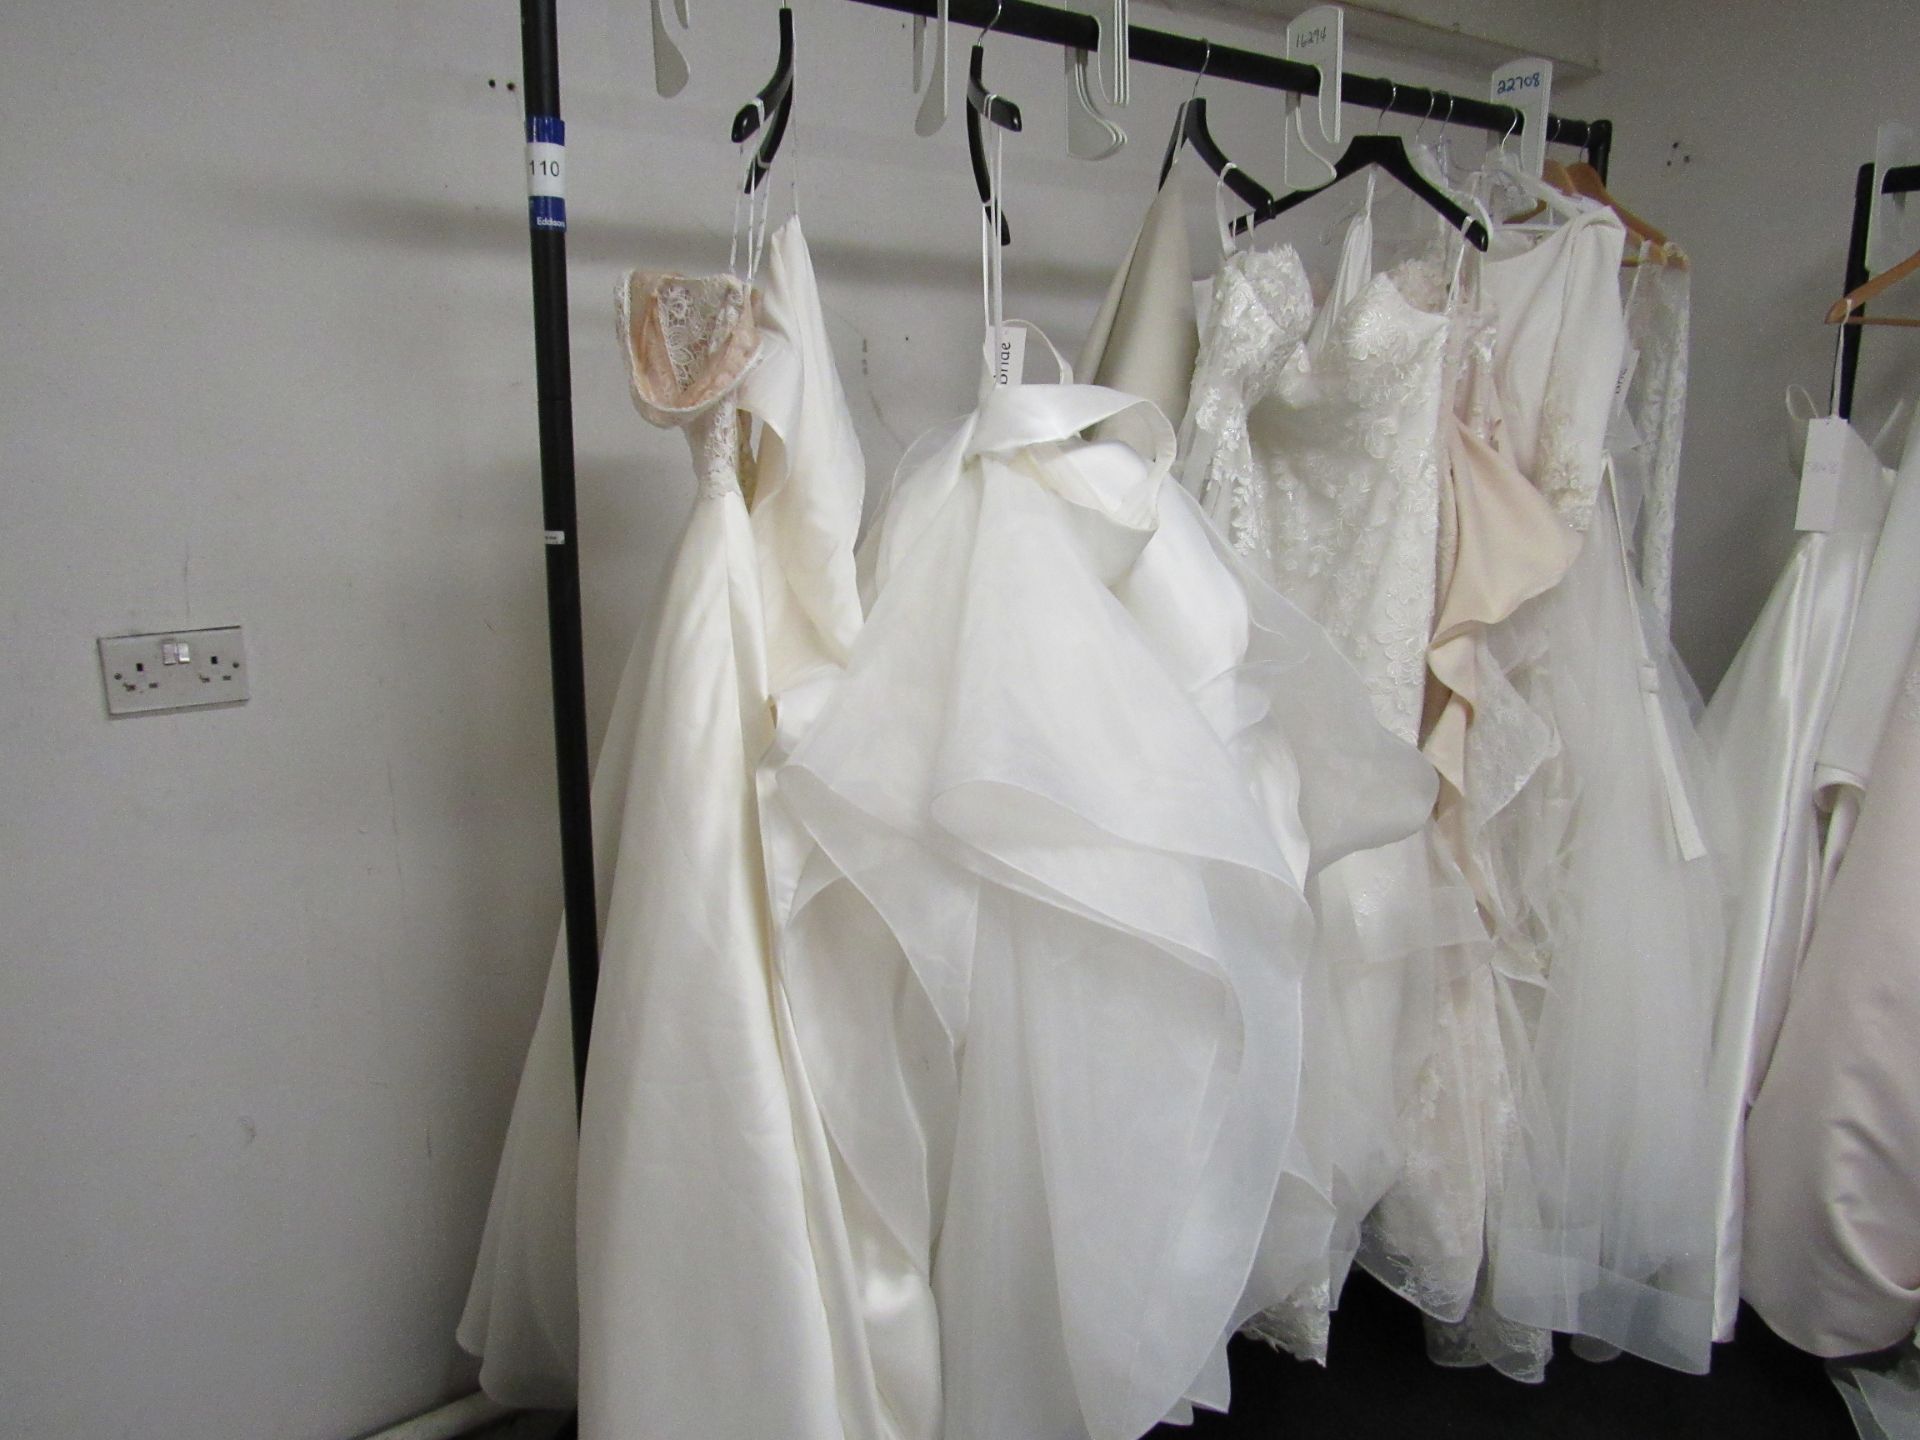 9 various bridal gowns to rail